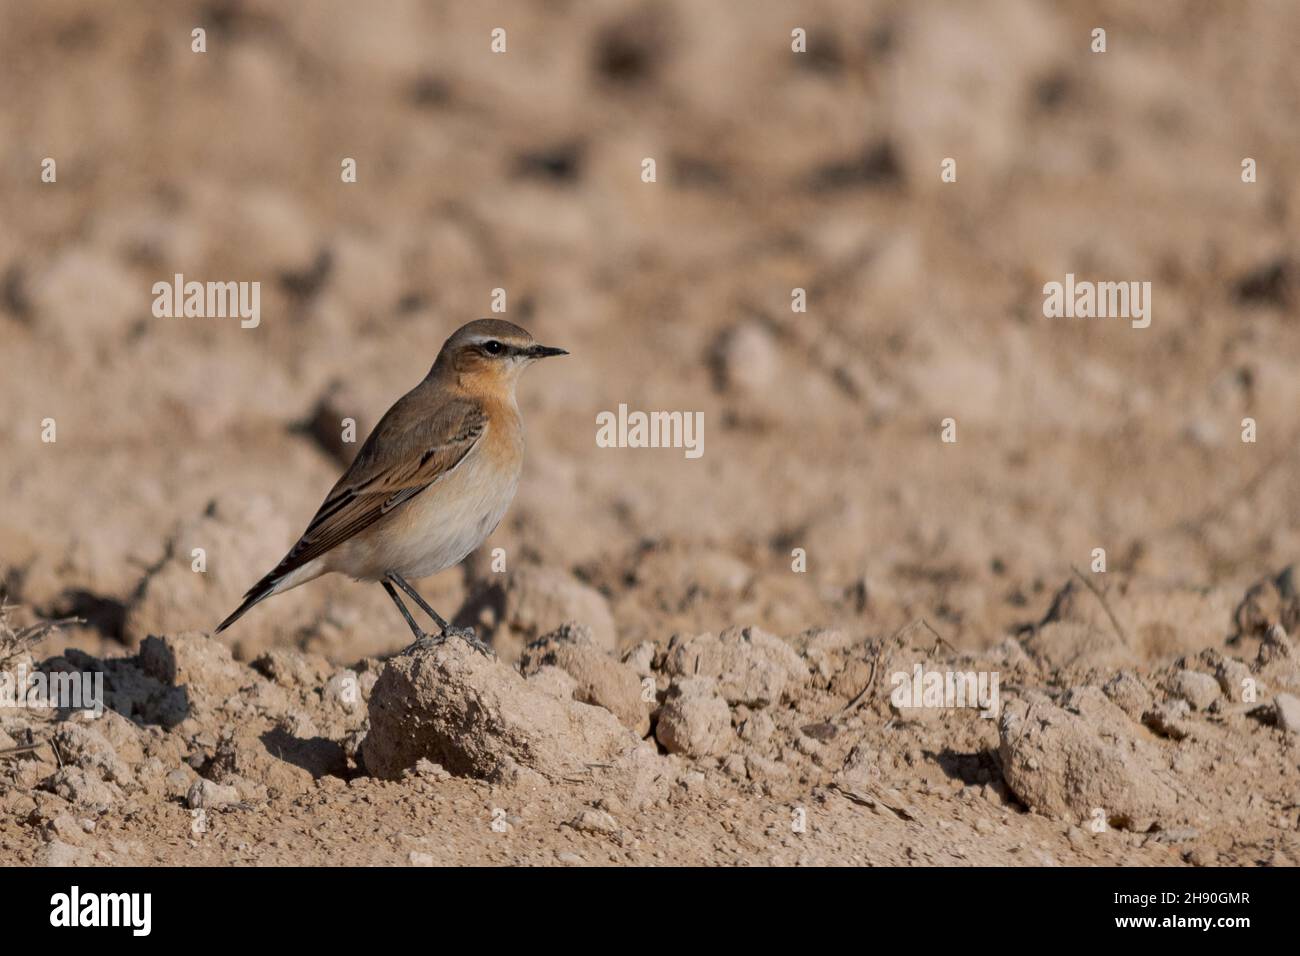 Oenanthe oenanthe - Wheatear is a species of passerine bird in the Muscicapidae family. Stock Photo